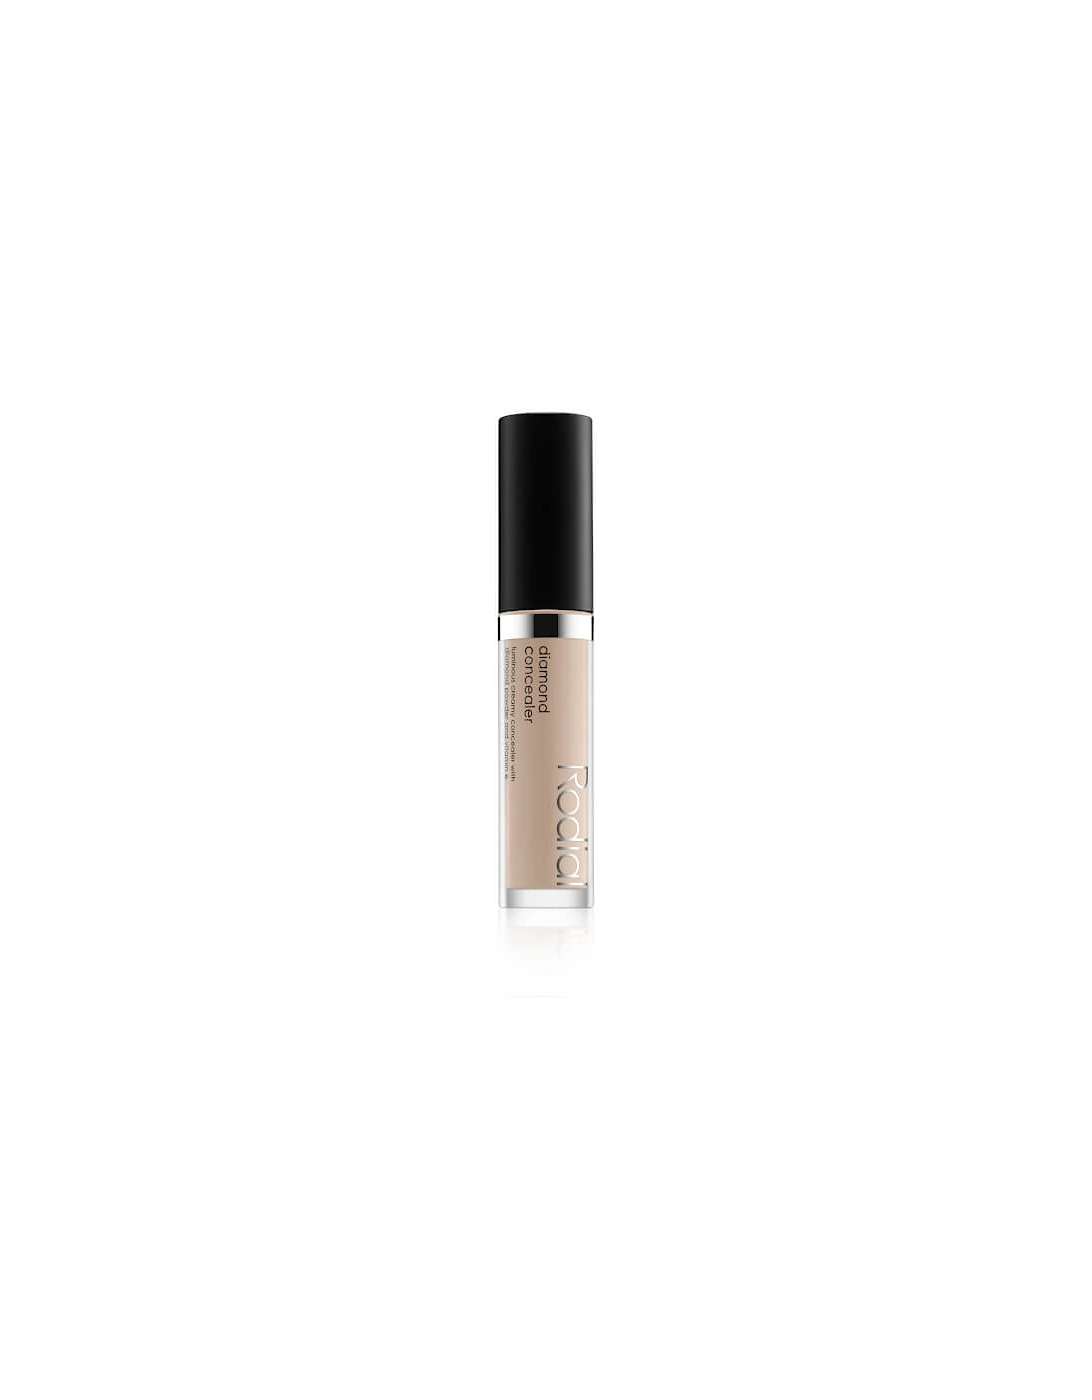 Diamond Liquid Concealer - 50 - - Diamond Liquid Concealer - 10 - Diamond Liquid Concealer - 20 - Diamond Liquid Concealer - 30 - Diamond Liquid Concealer - 40 - Diamond Liquid Concealer - 50, 2 of 1